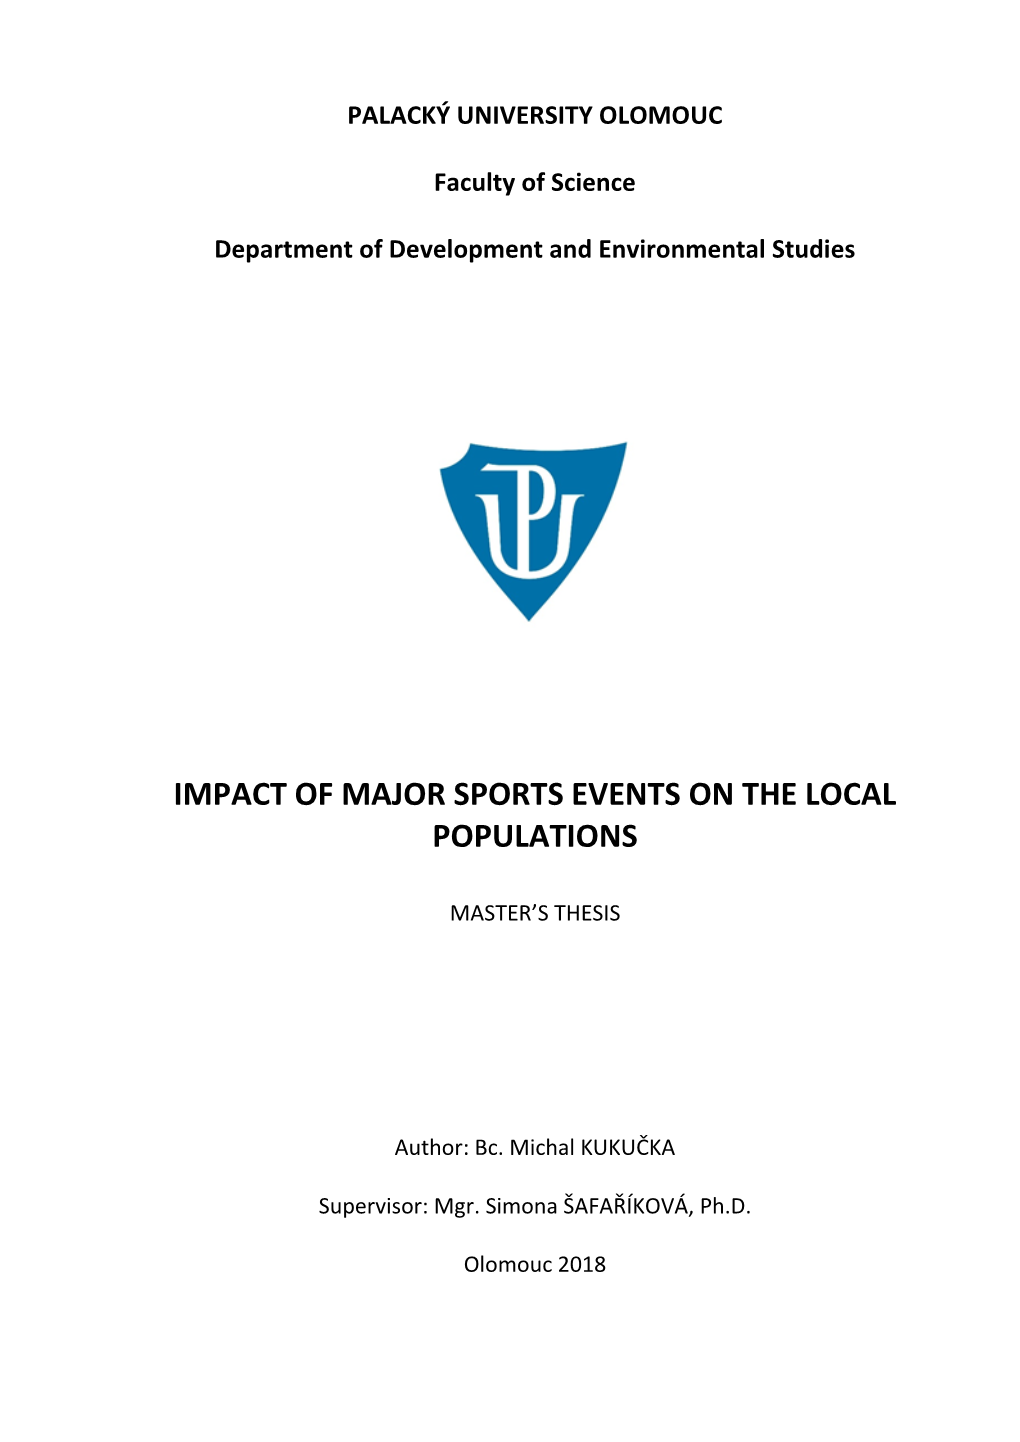 Impact of Major Sports Events on the Local Populations